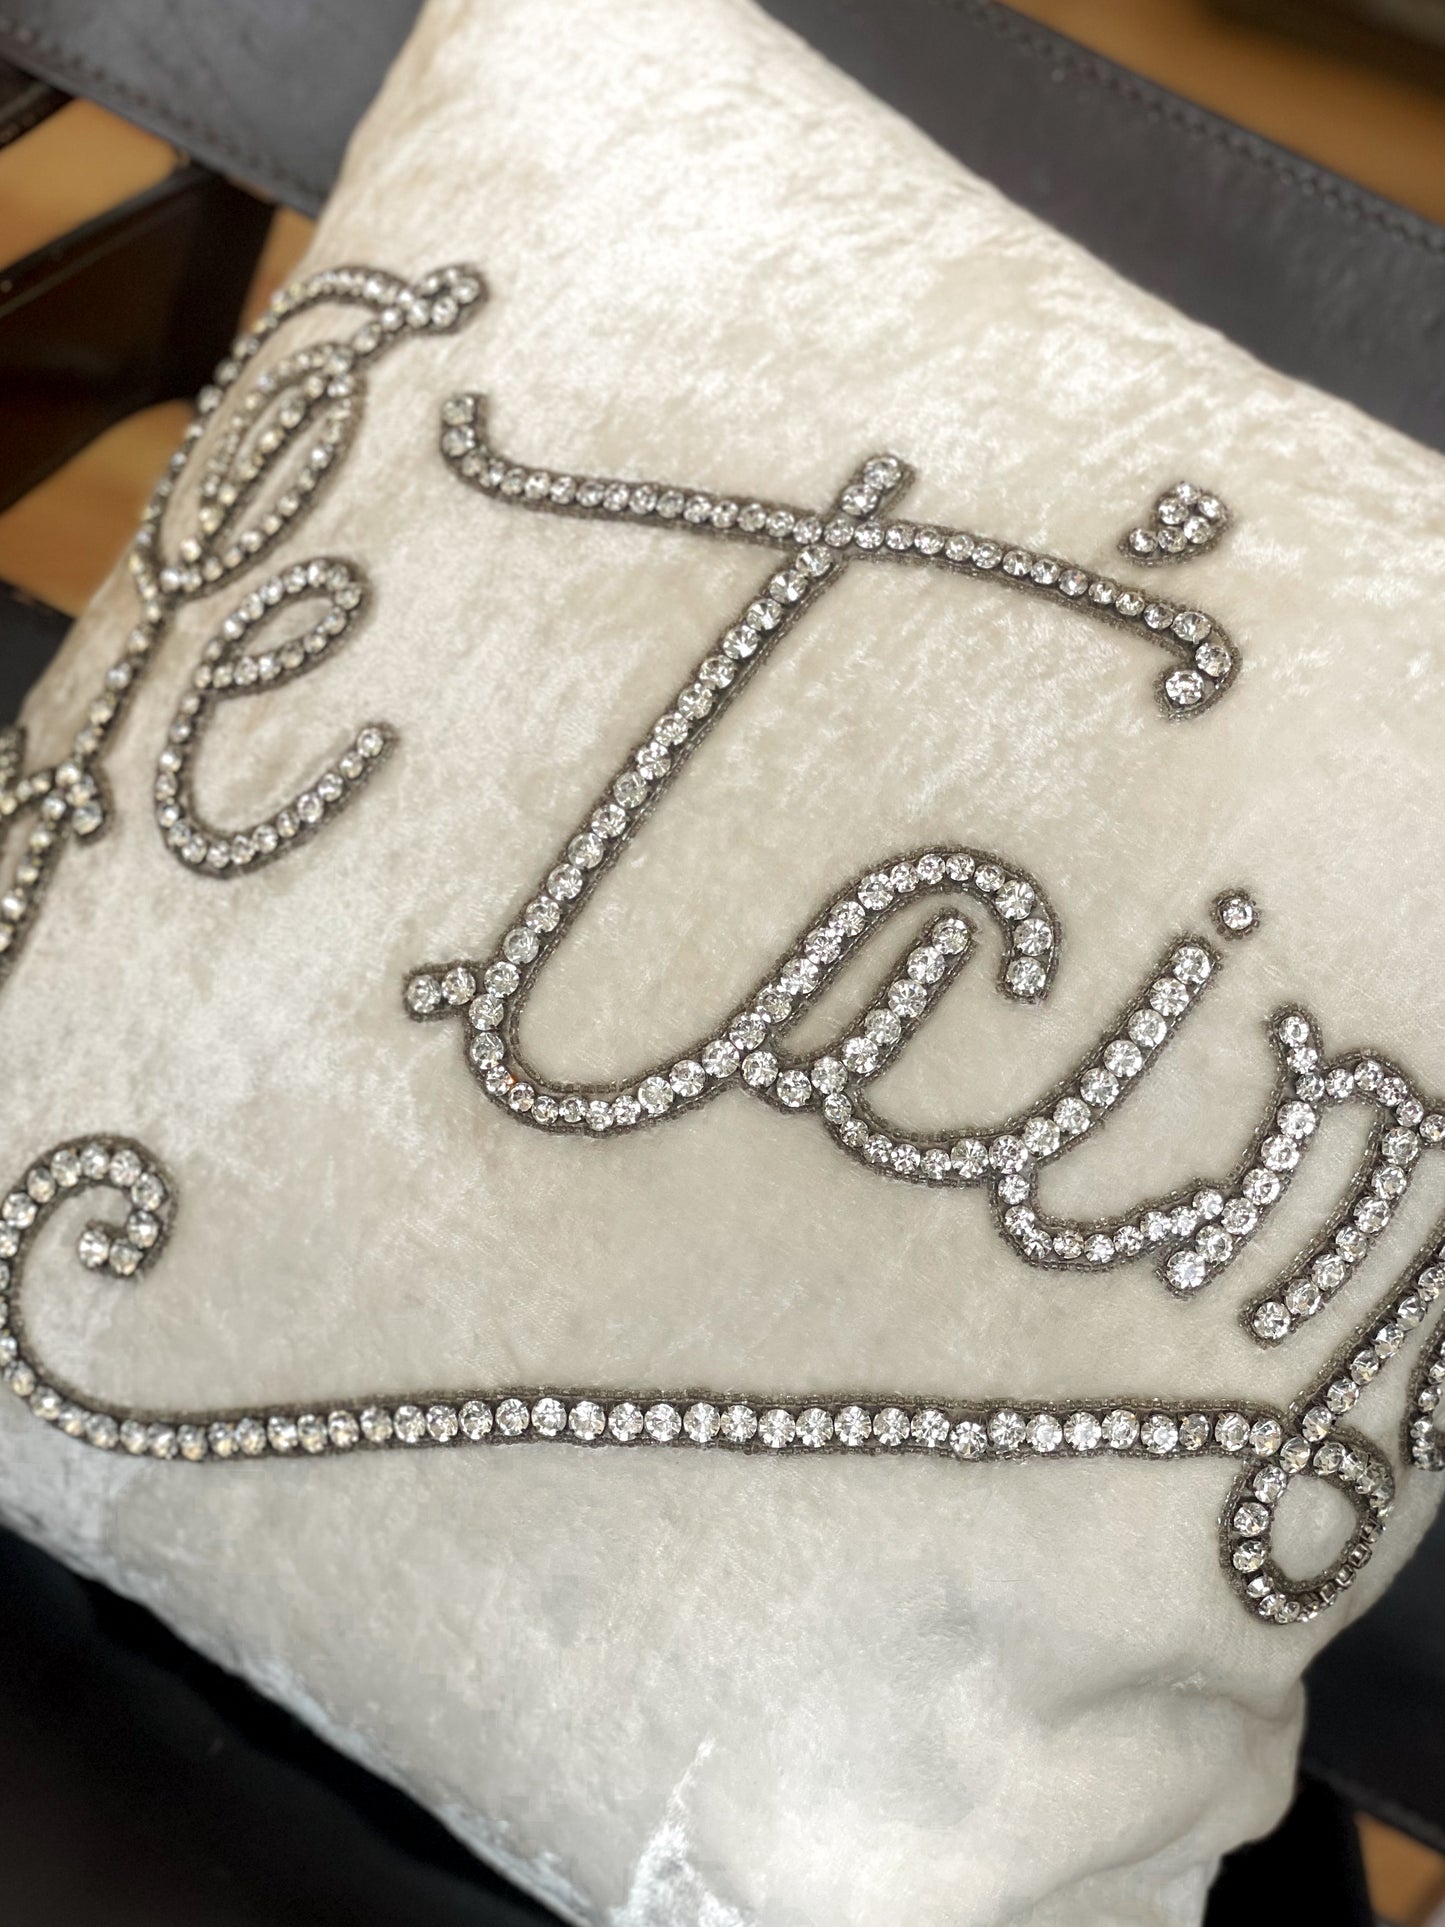 Upcycled Gem Je T'aime Pillow